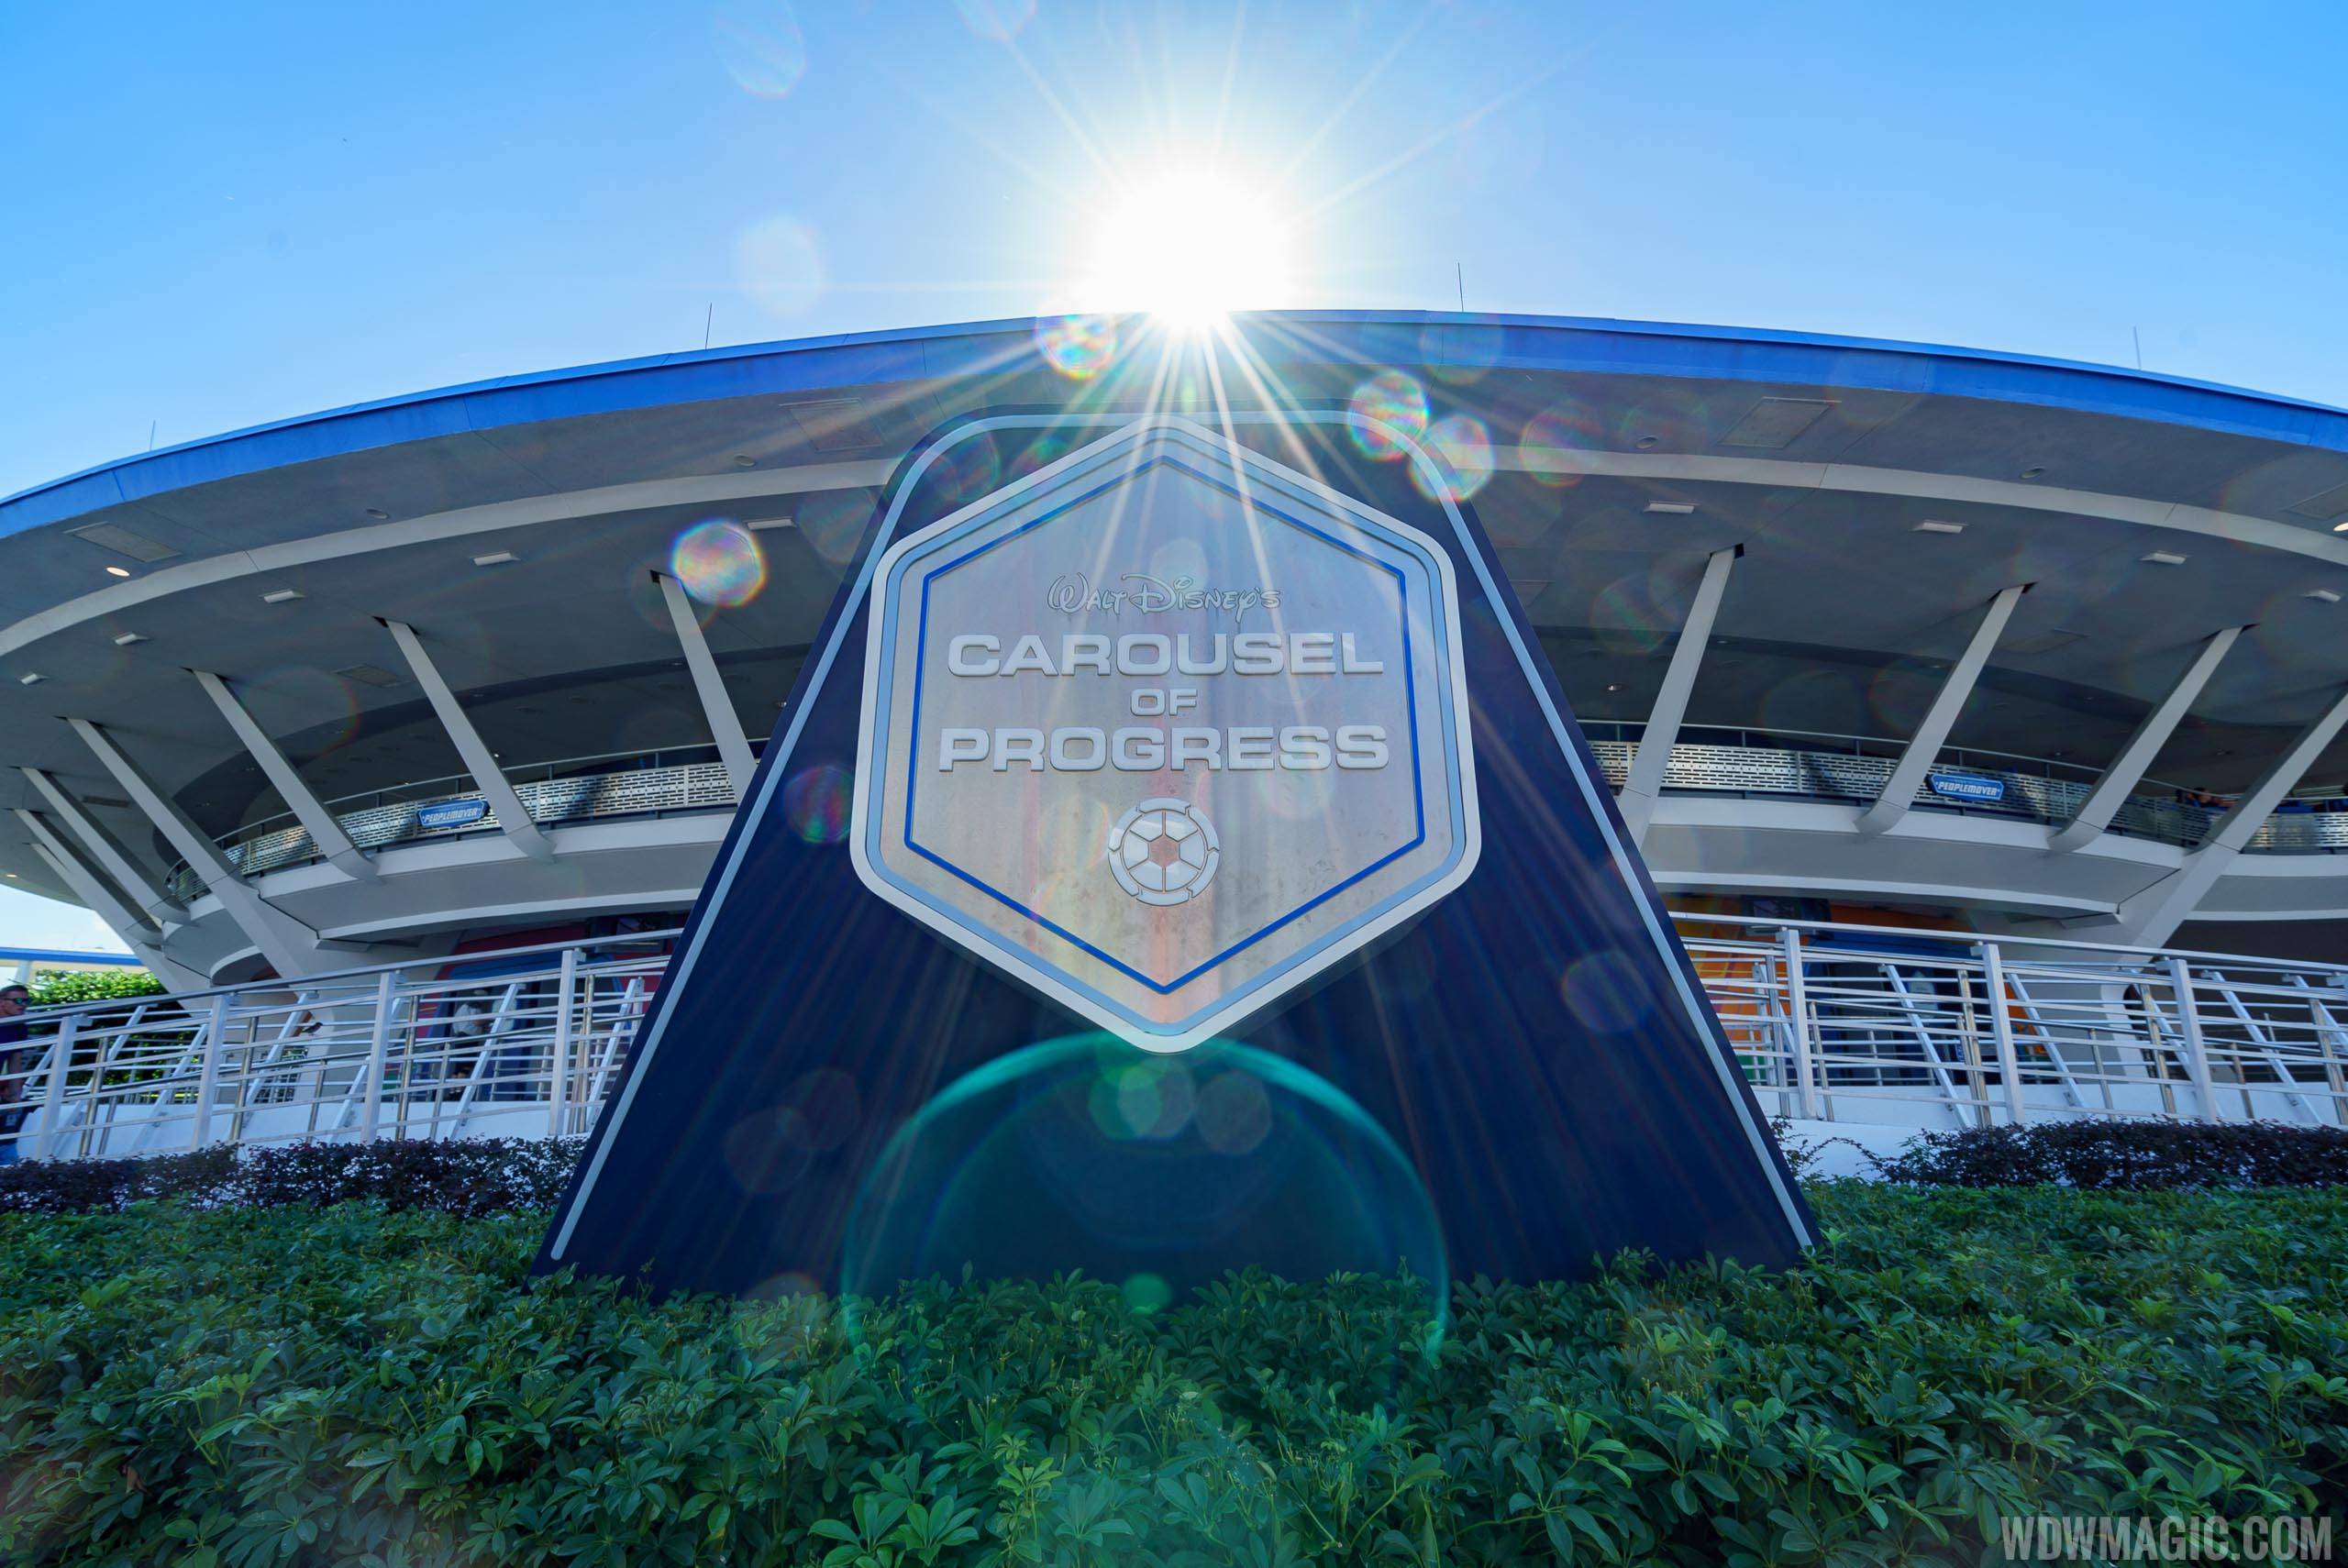 PHOTOS - New marquee sign at the Carousel of Progress